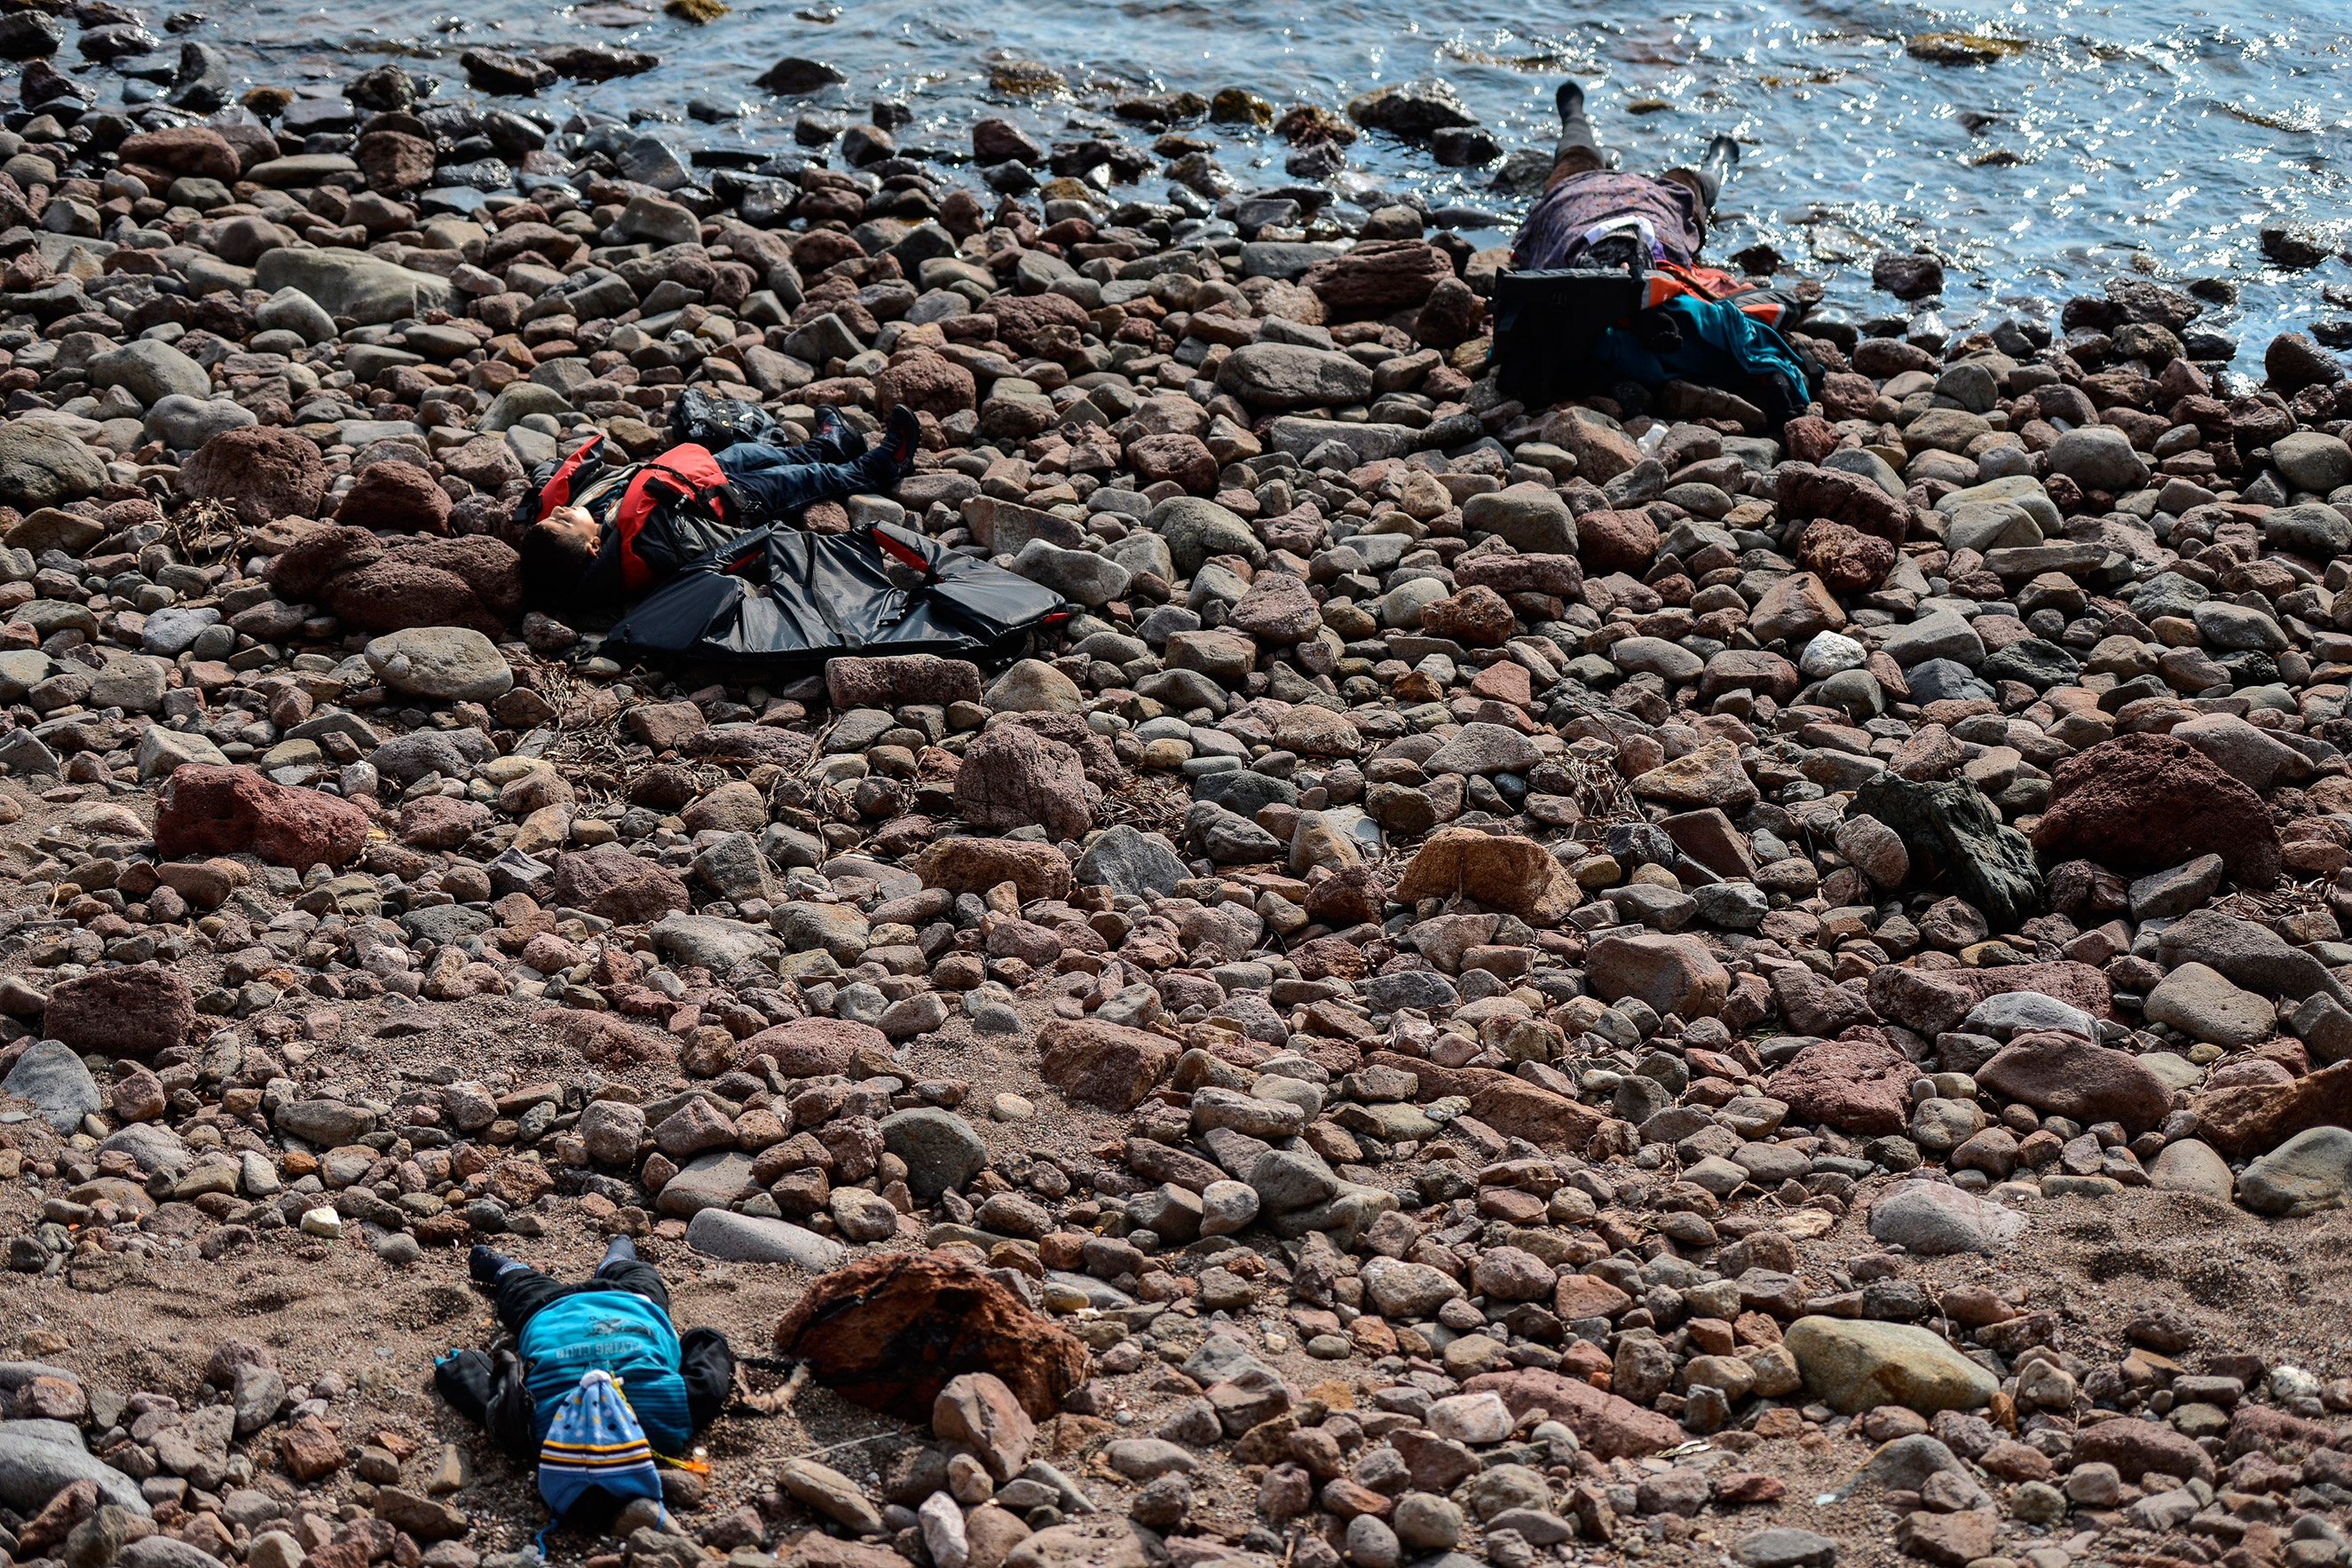 Three bodies are washed up on a beach after authorities said at least 37 people were killed when their boat capsized in the Aegean Sea while trying to cross to Greece from Canakkale province, Turkey, Jan. 30, 2016. (Ozan Kose—AFP/Getty Images)